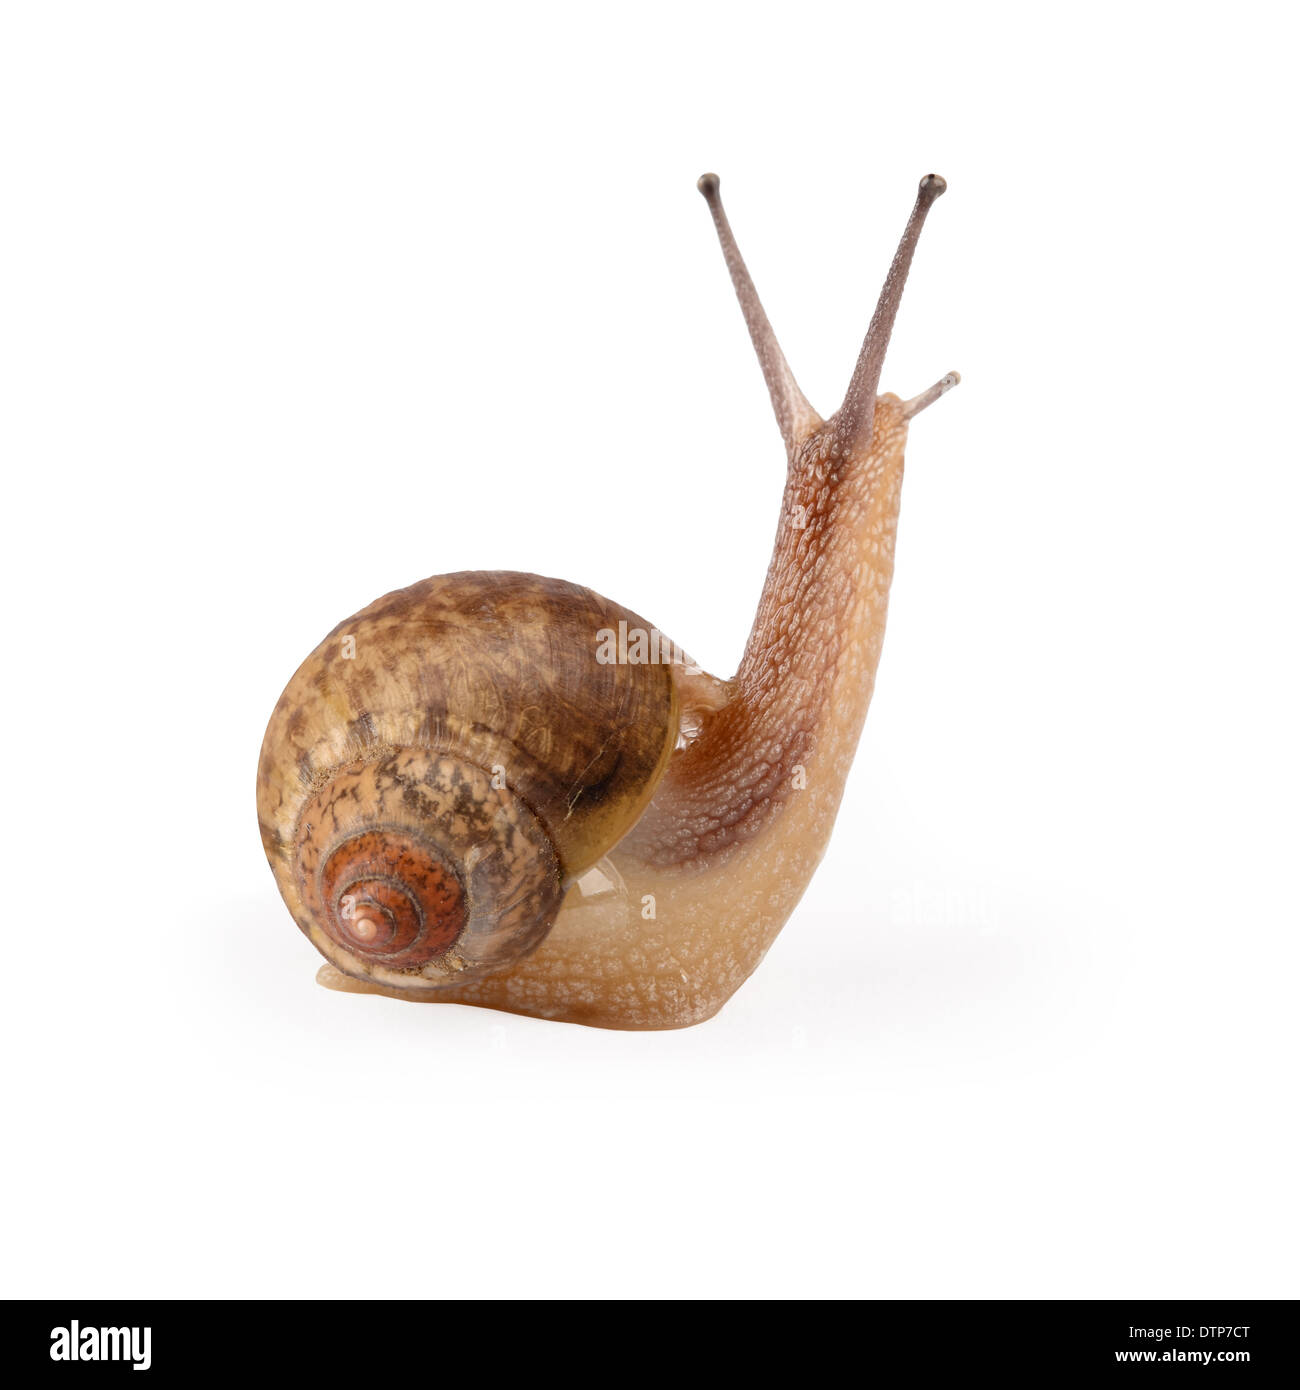 garden snail is being looked Stock Photo